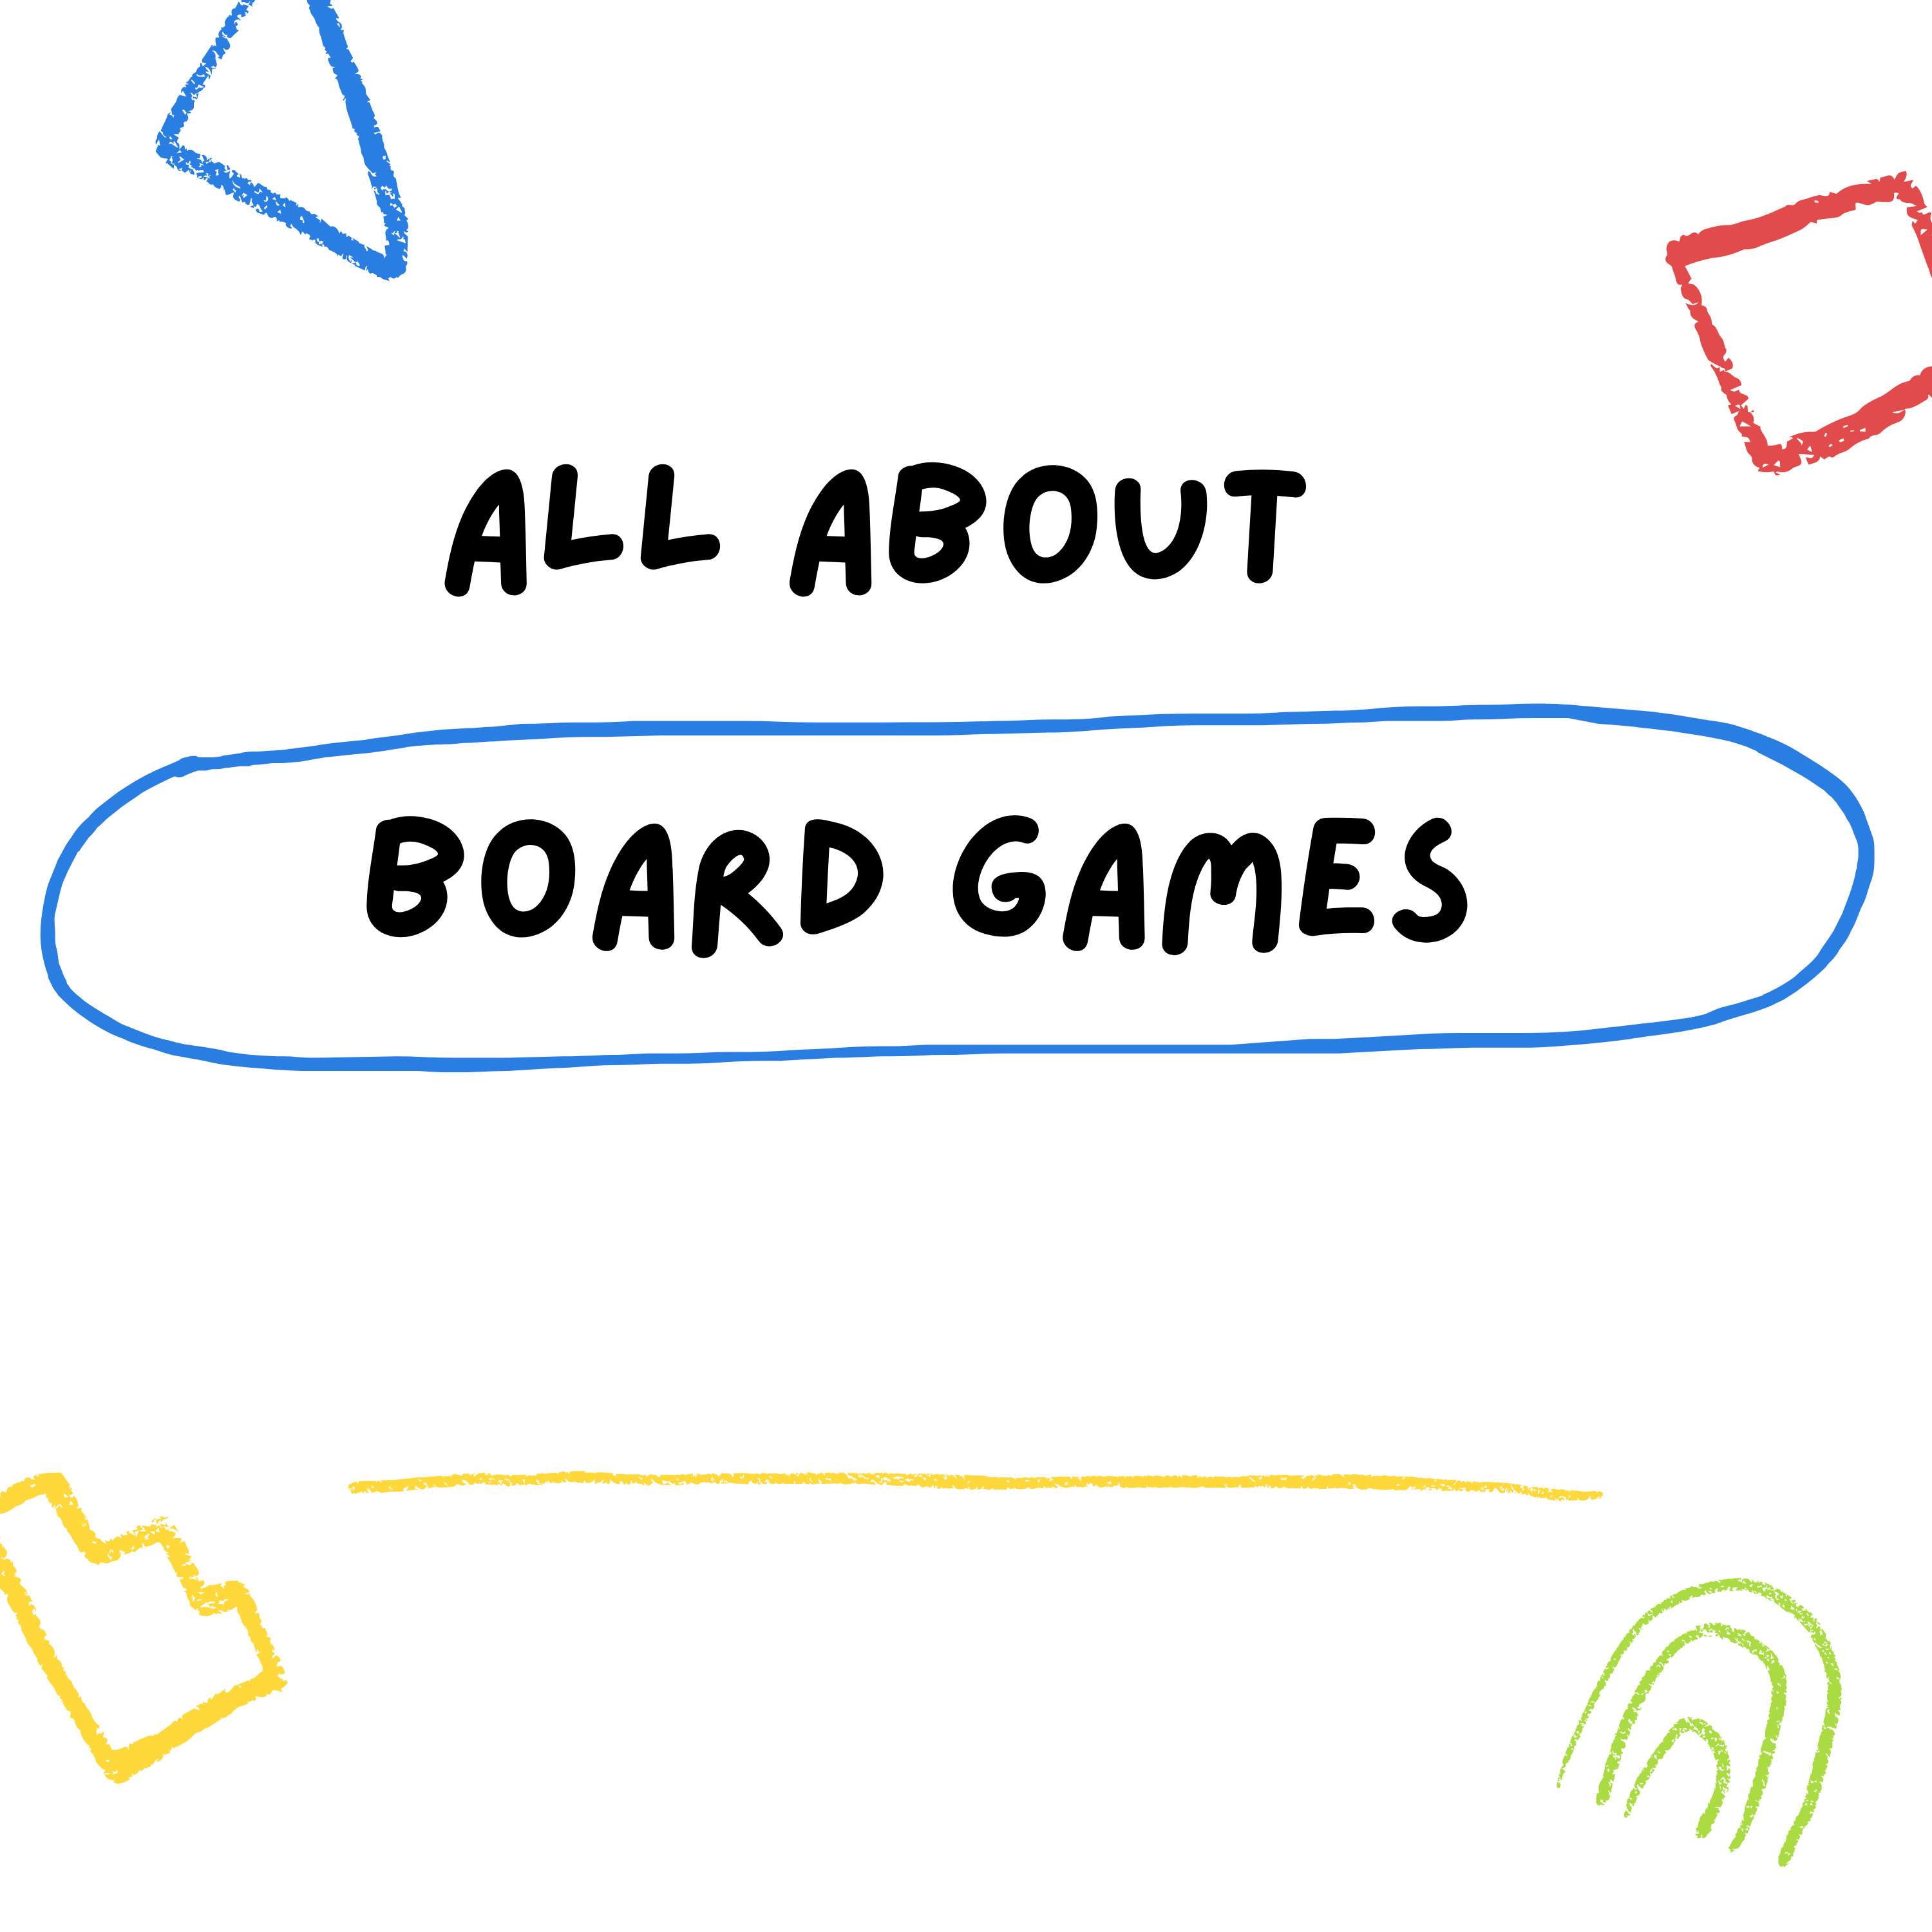 All About Board Games